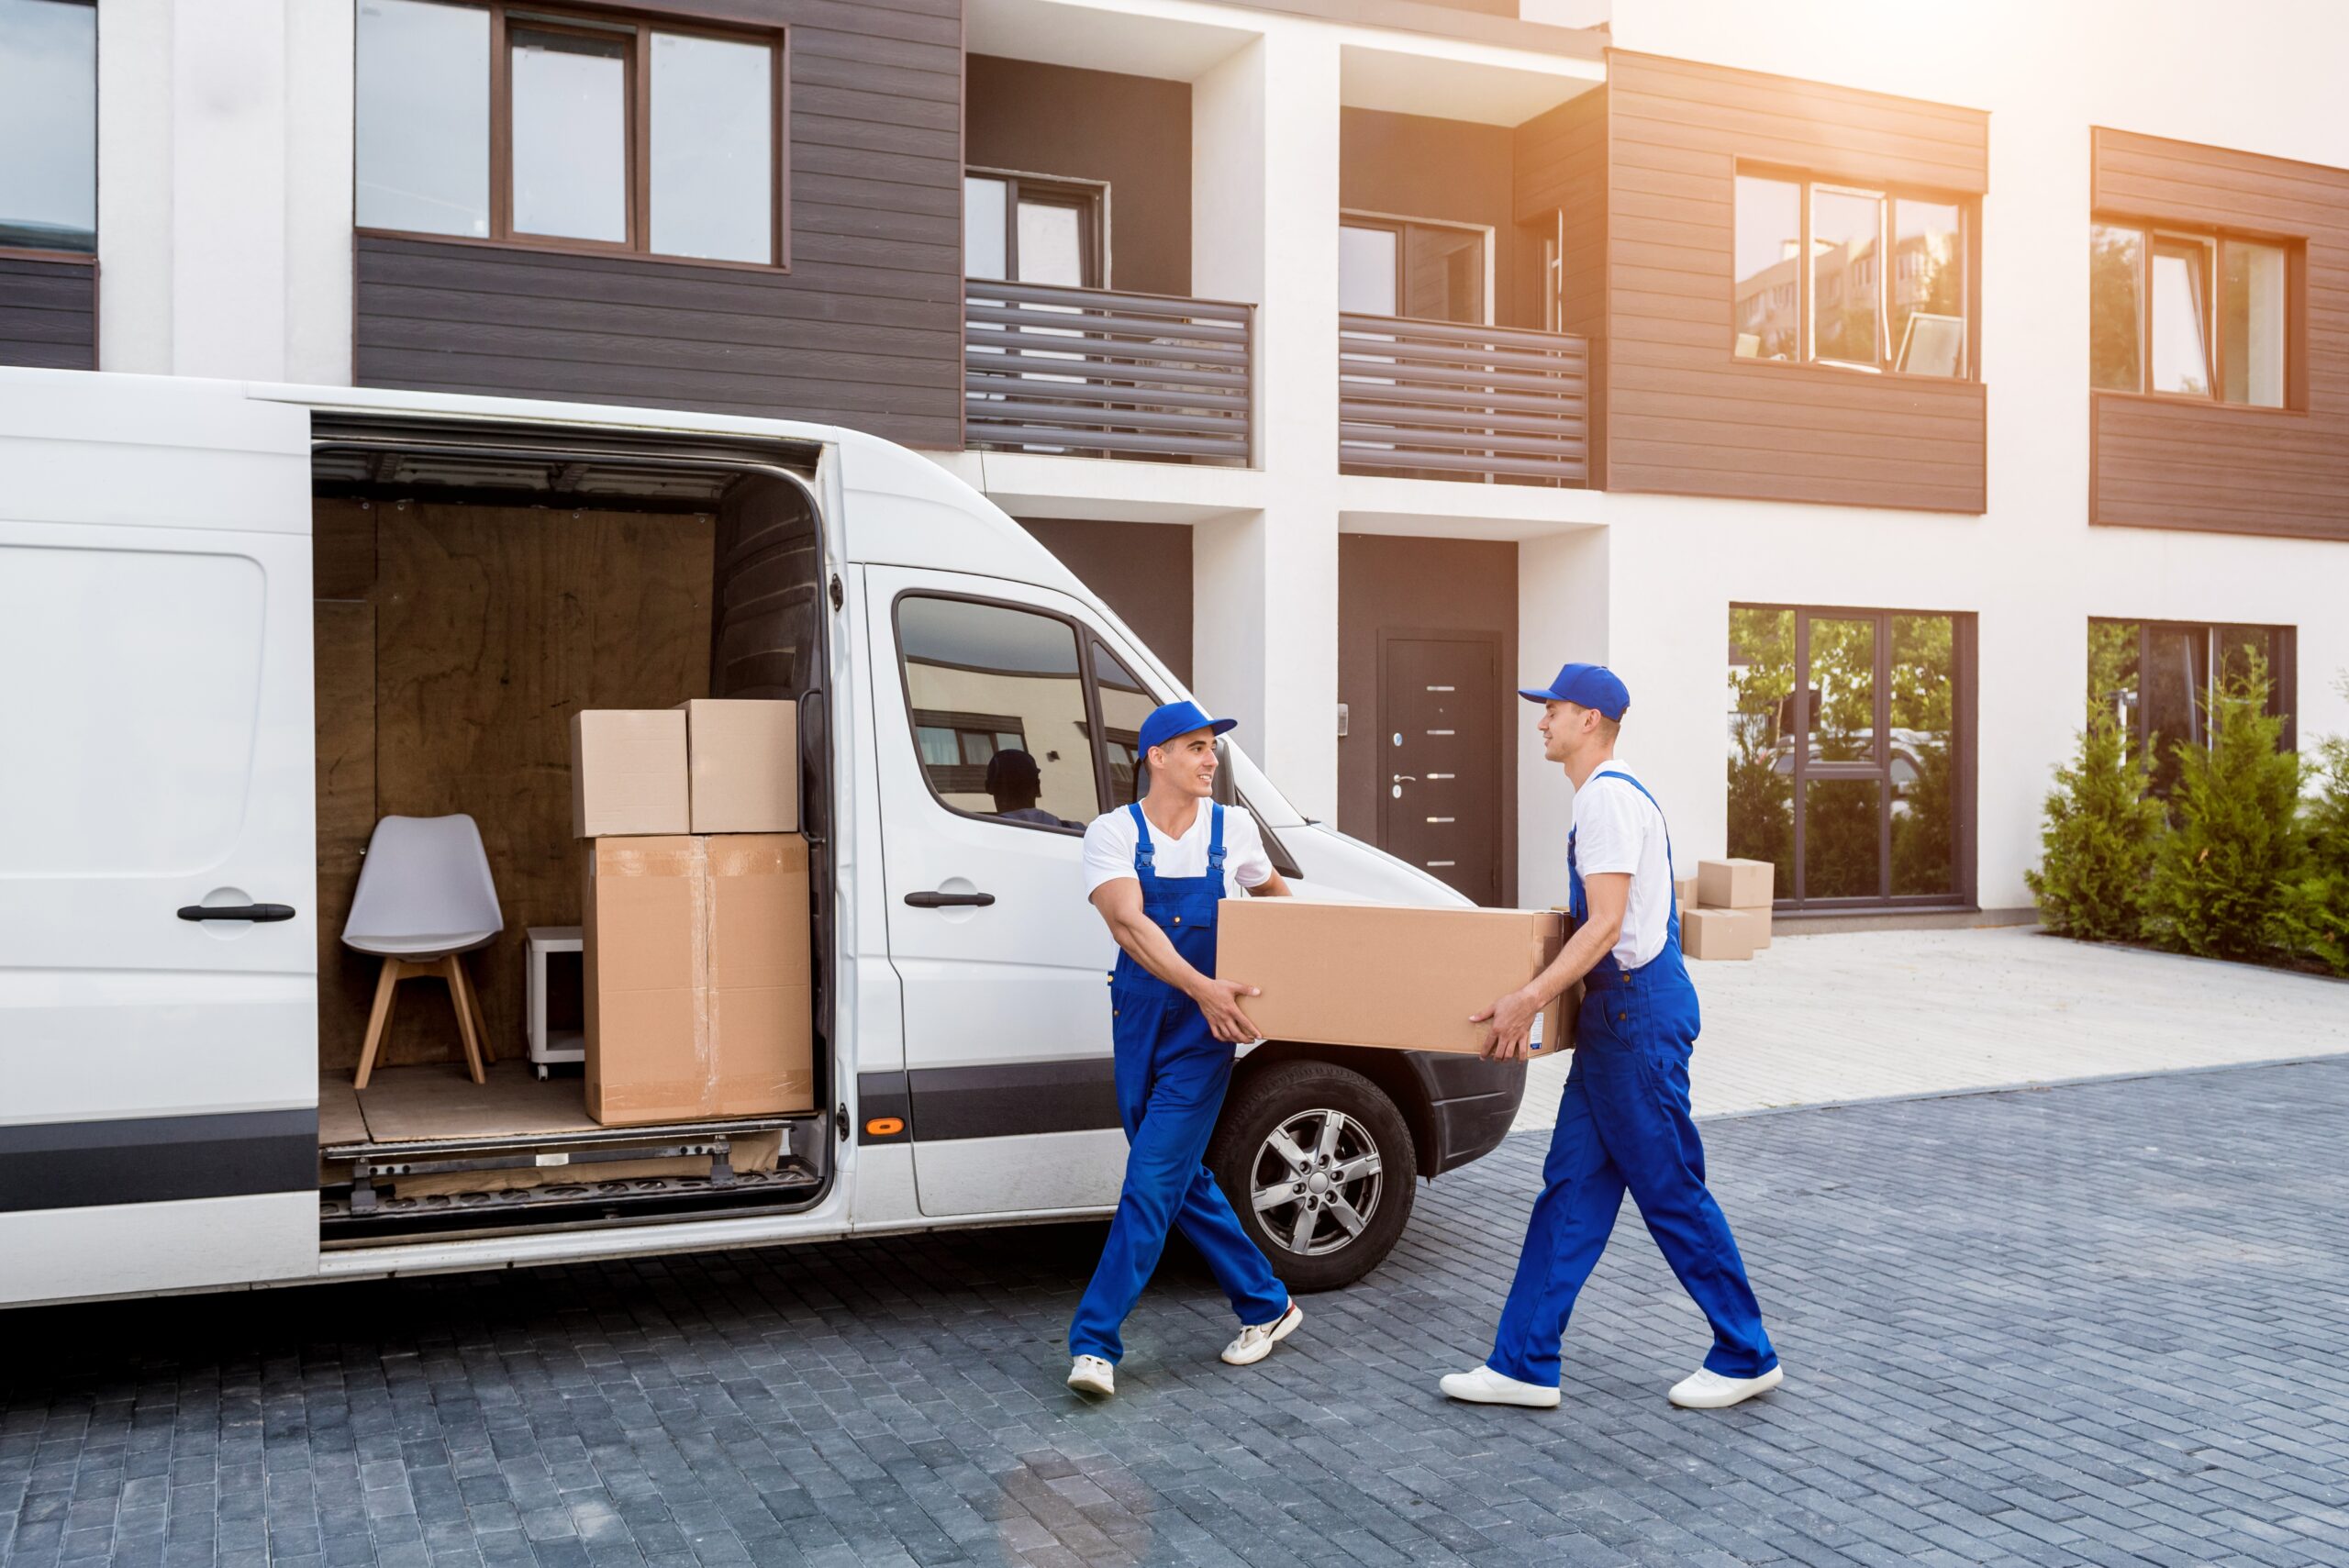 NRI's comprehensive U.S. relocation services simplify moving employees from one state to another.